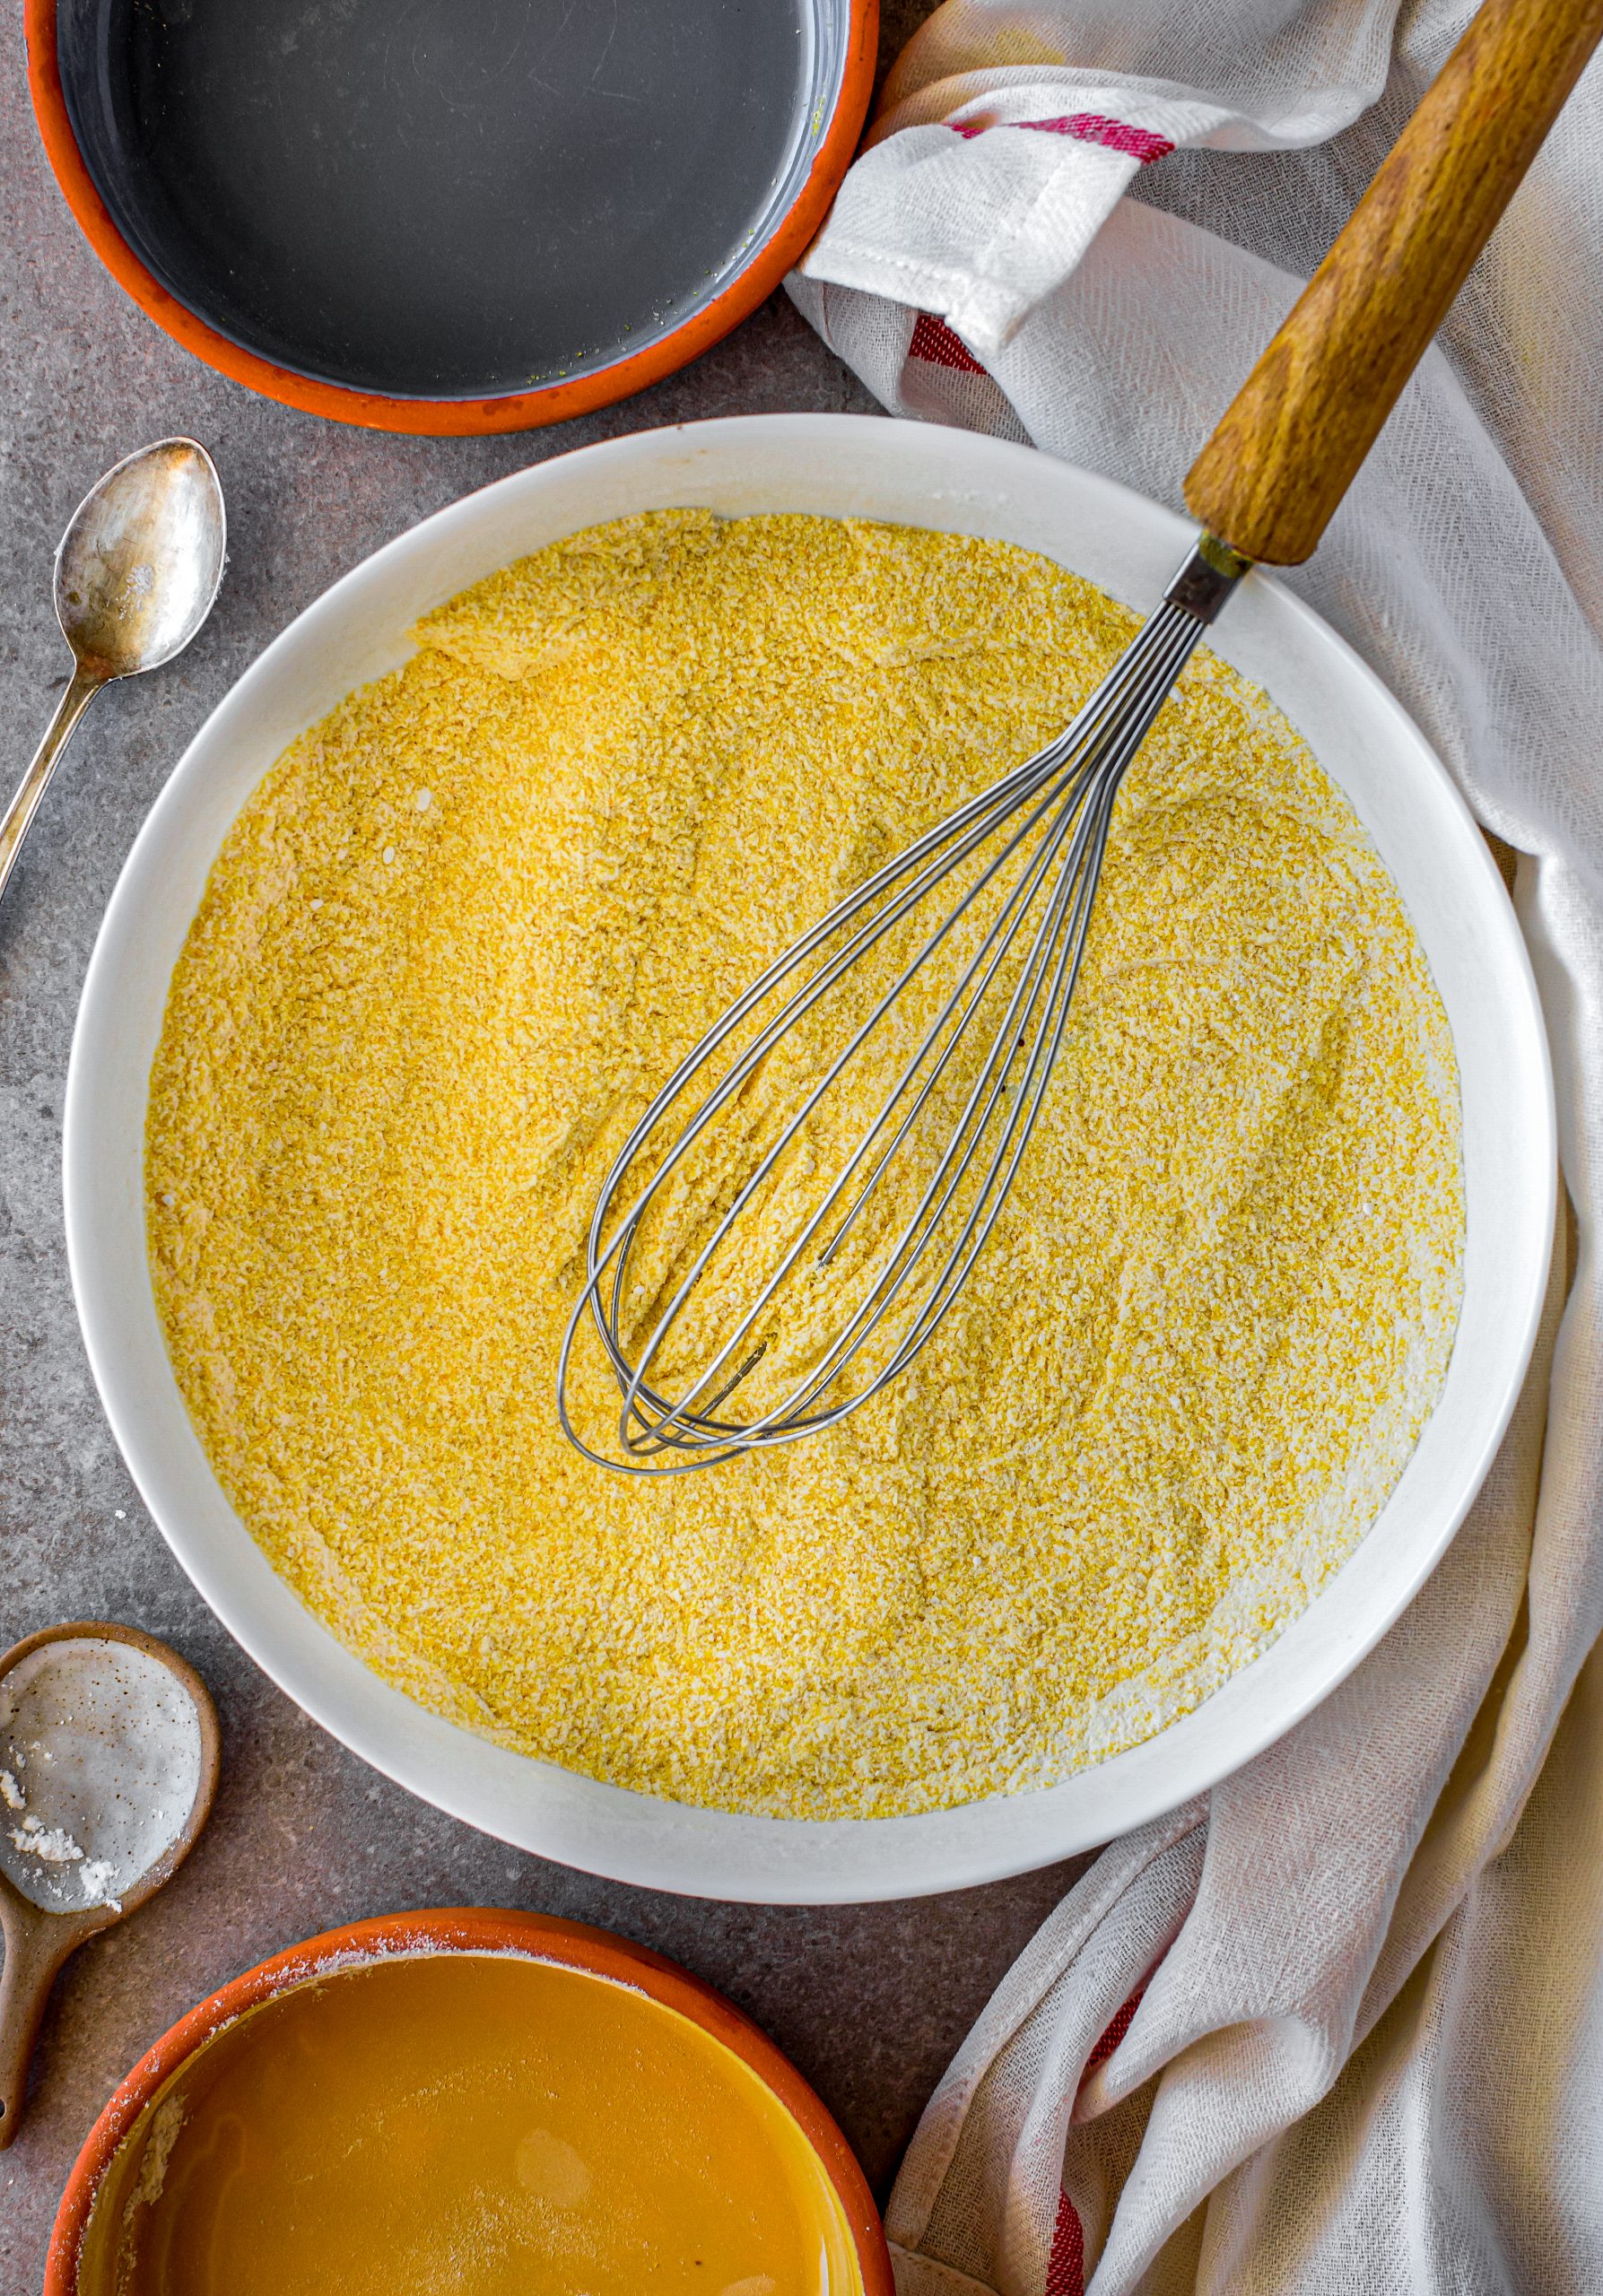 Mix together the sugar, flour, salt, baking powder, and cornmeal in a large bowl. 